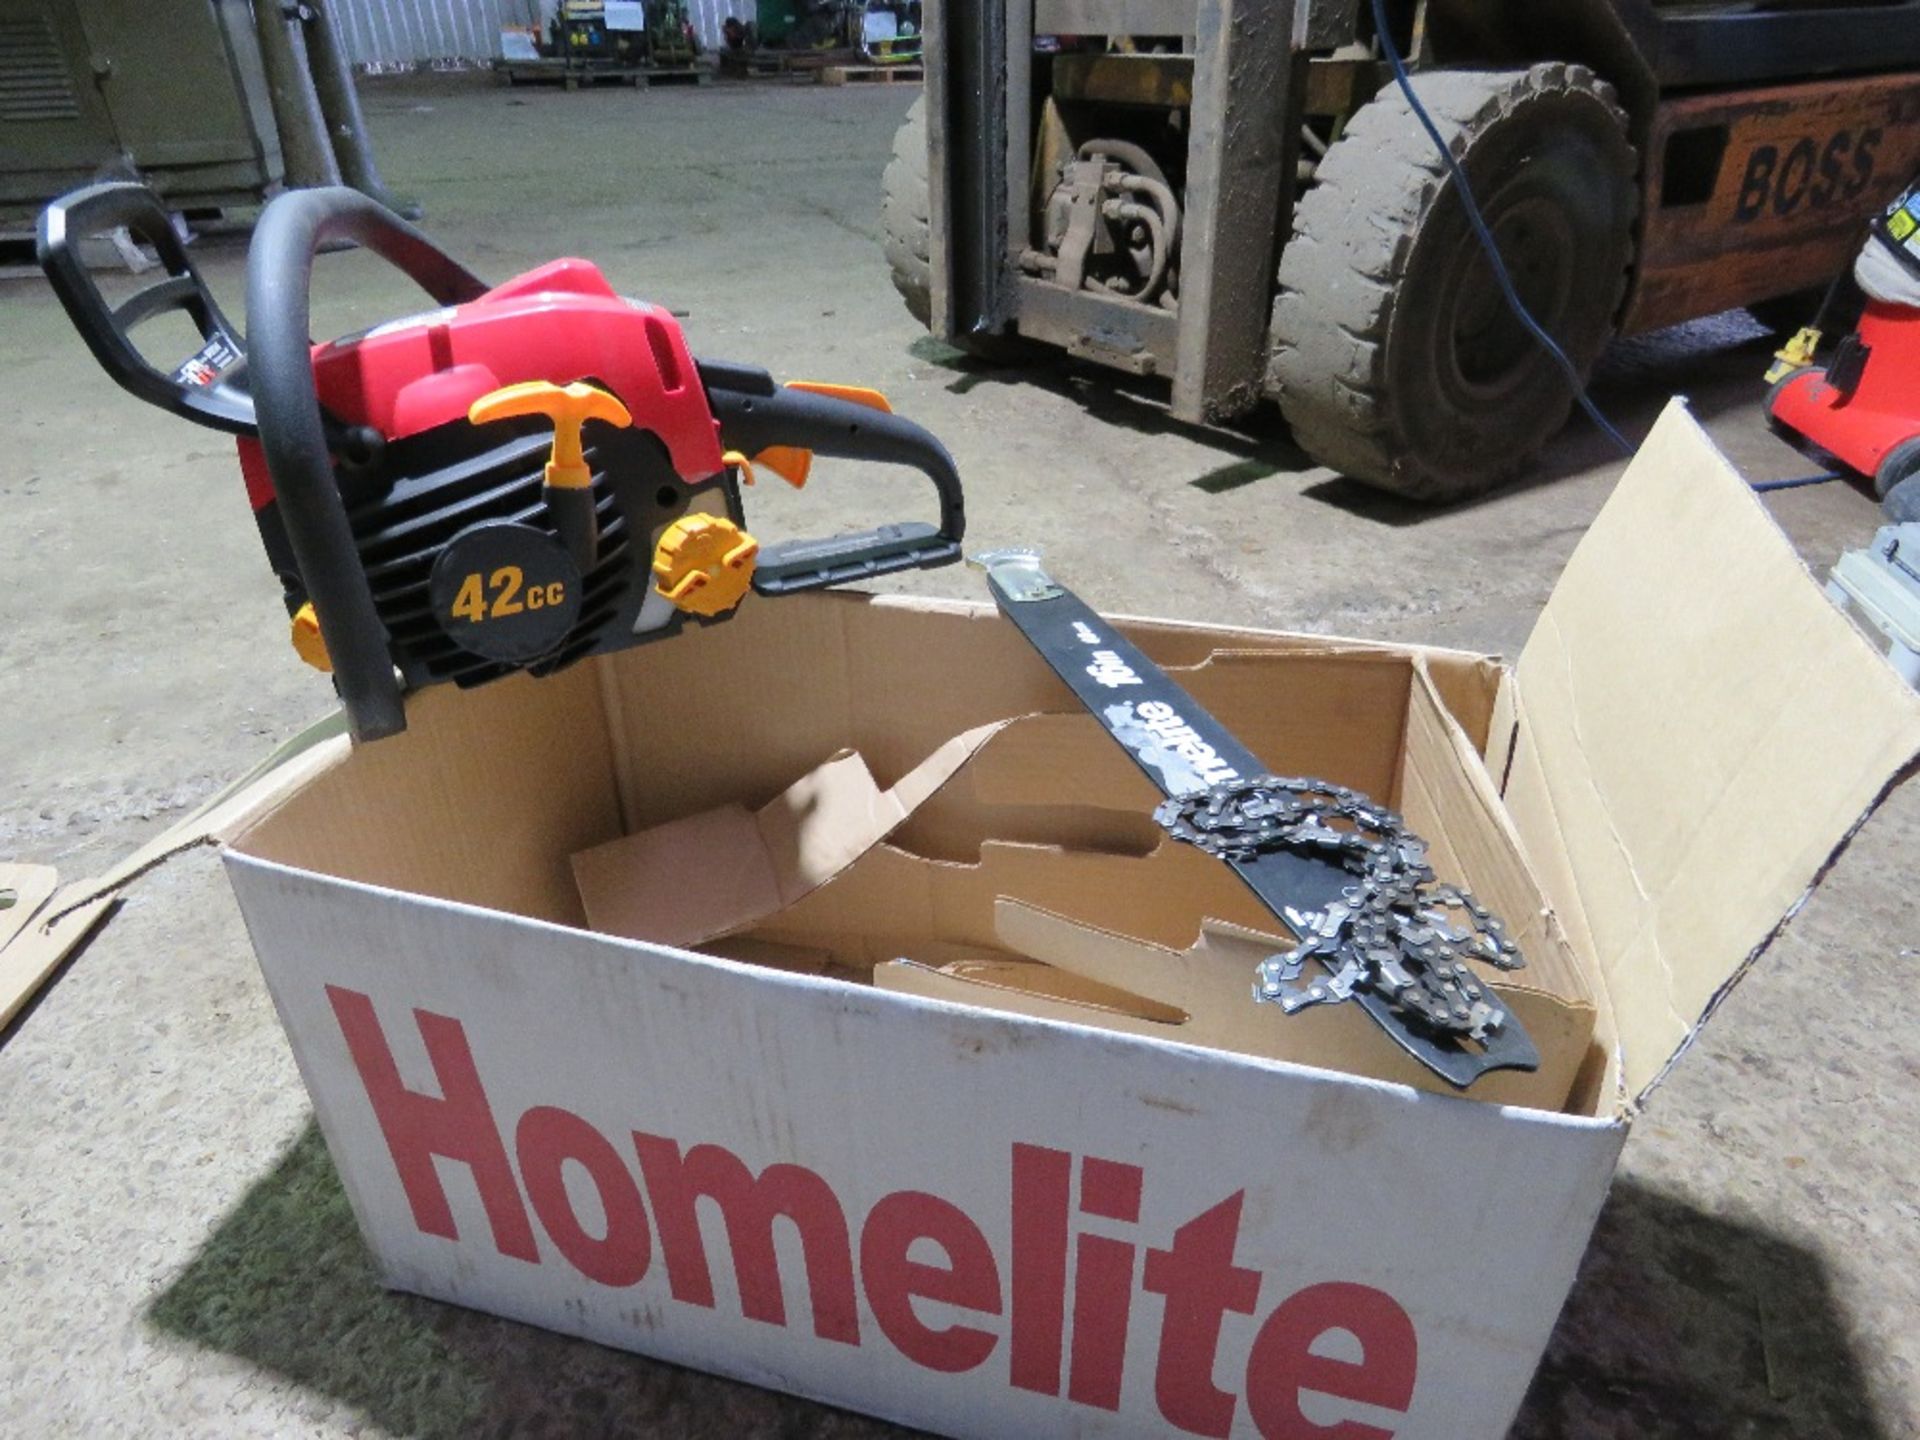 HOMELITE 42CC PETROL ENGINED CHAINSAW WITH 16" BAR, BOXED. - Image 2 of 2